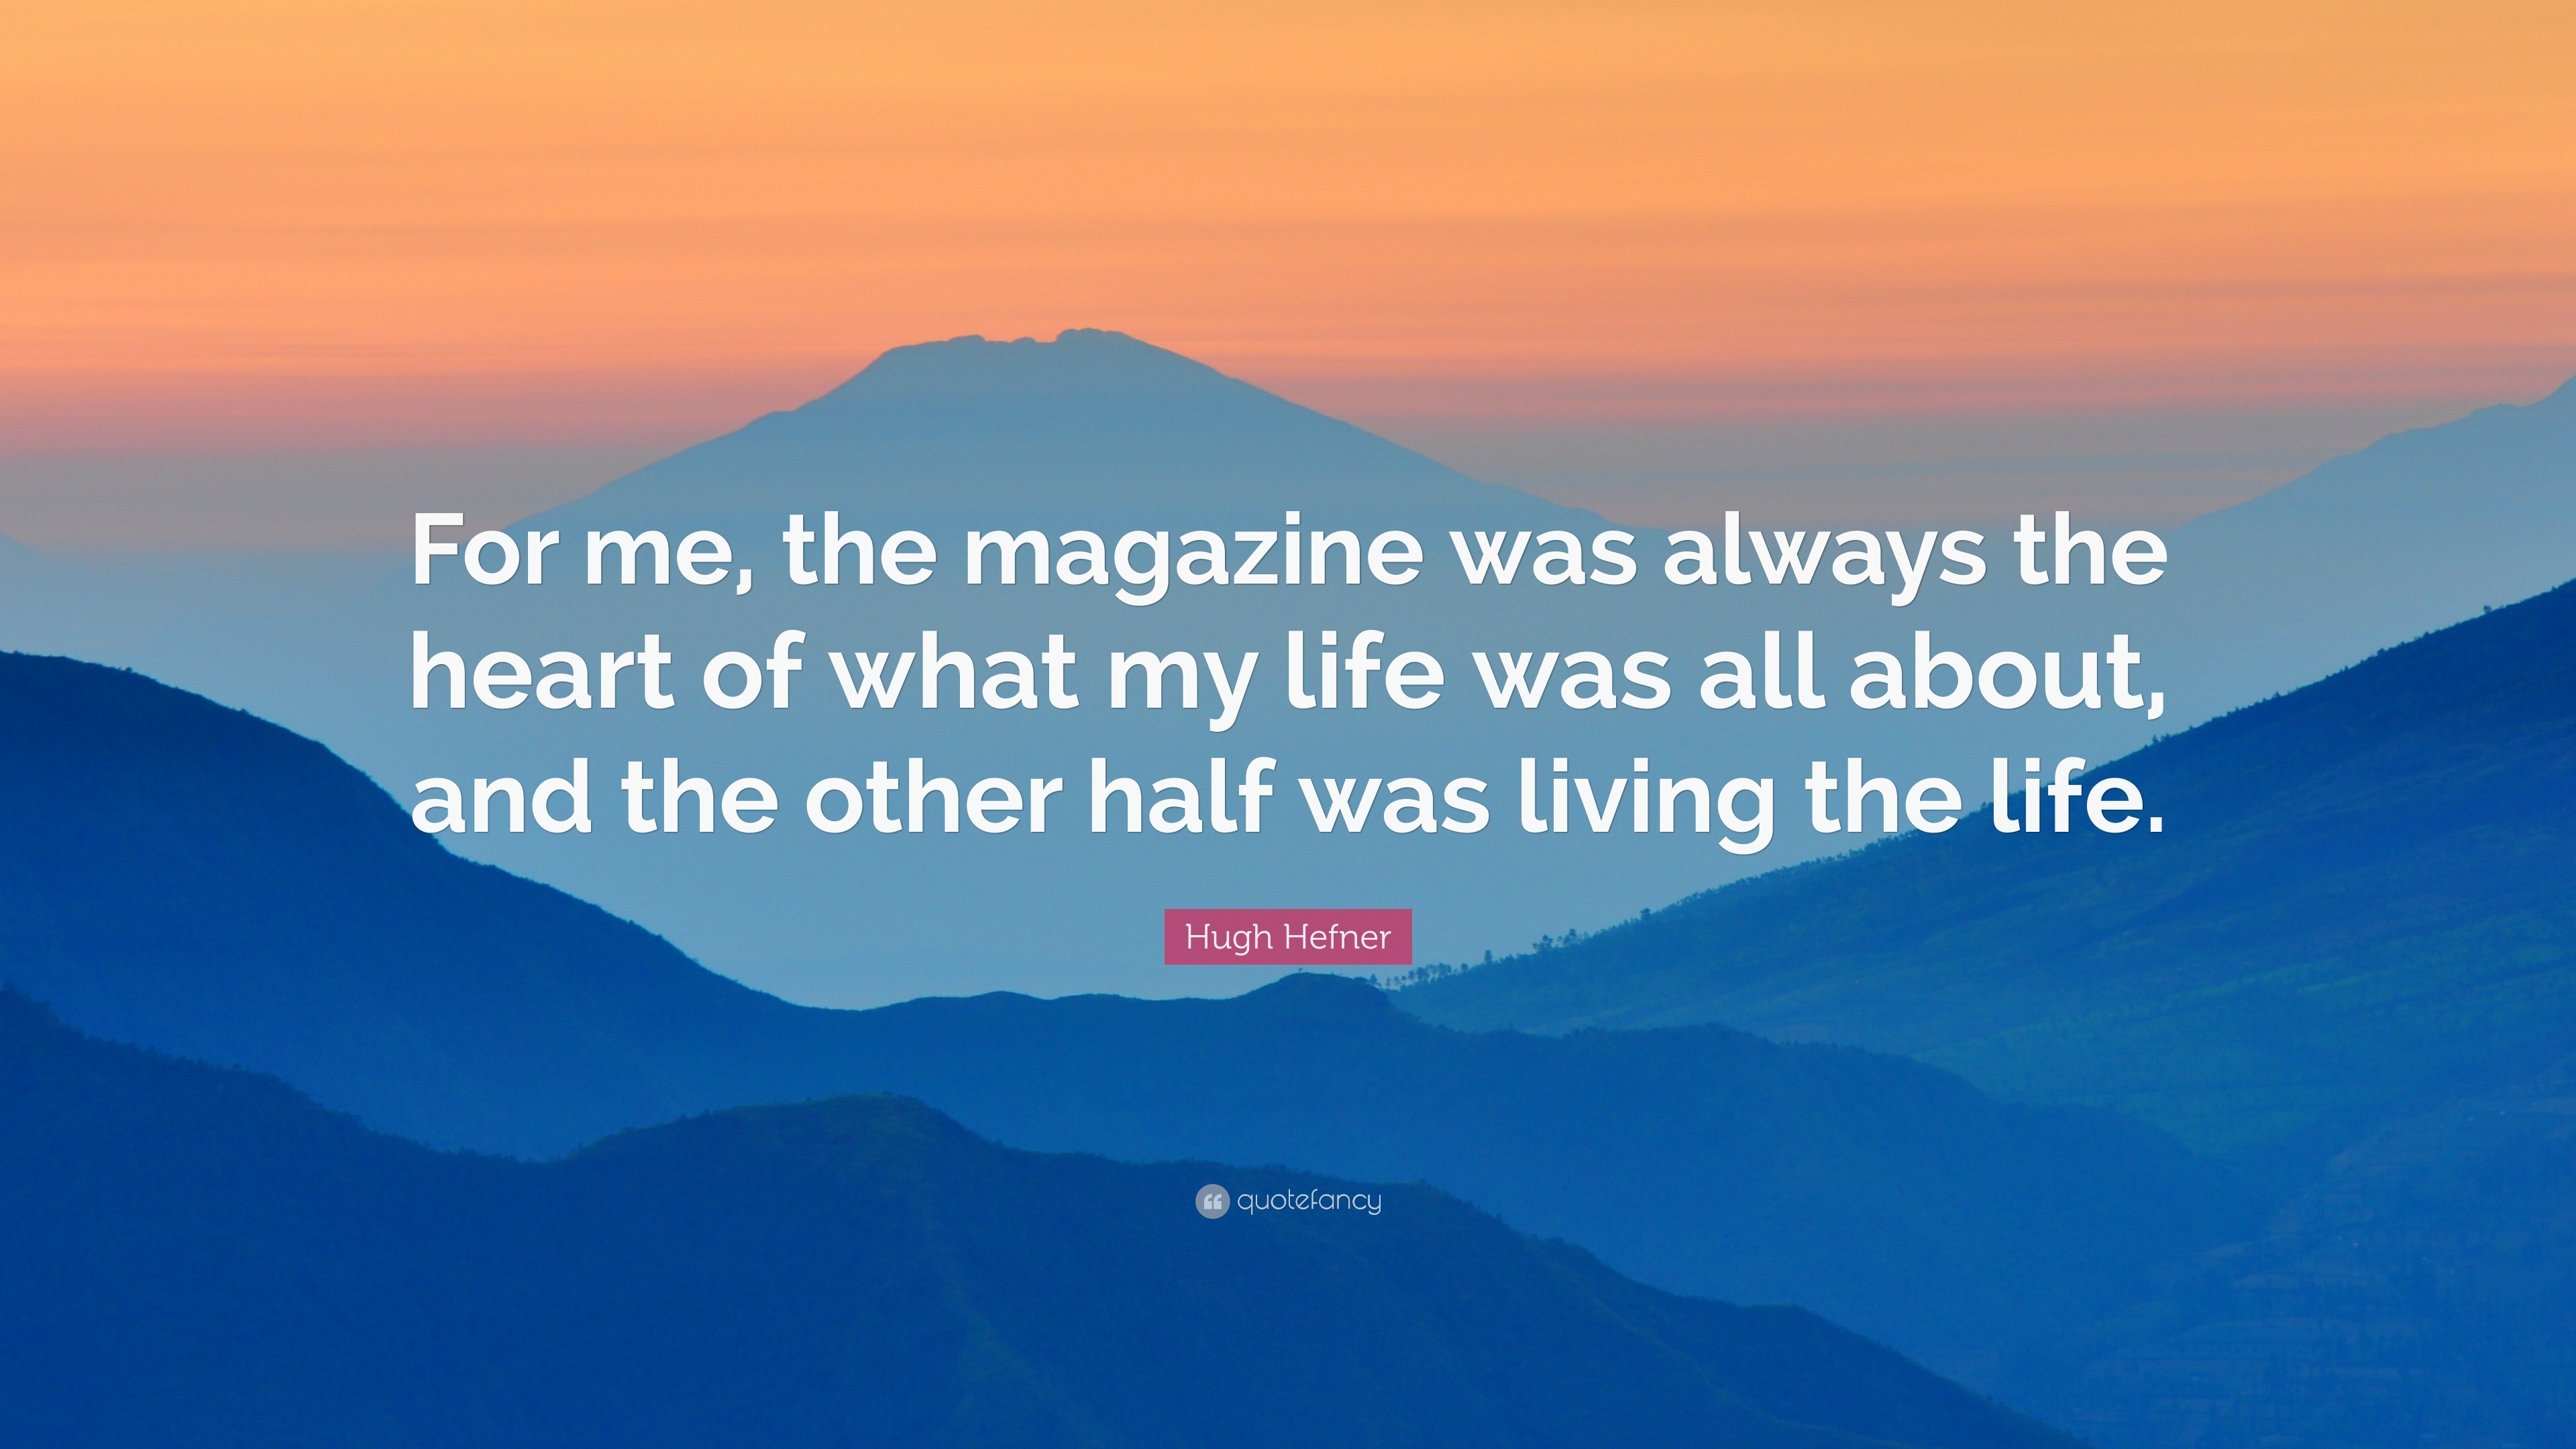 Hugh Hefner Quote: “For me, the magazine was always the heart of what